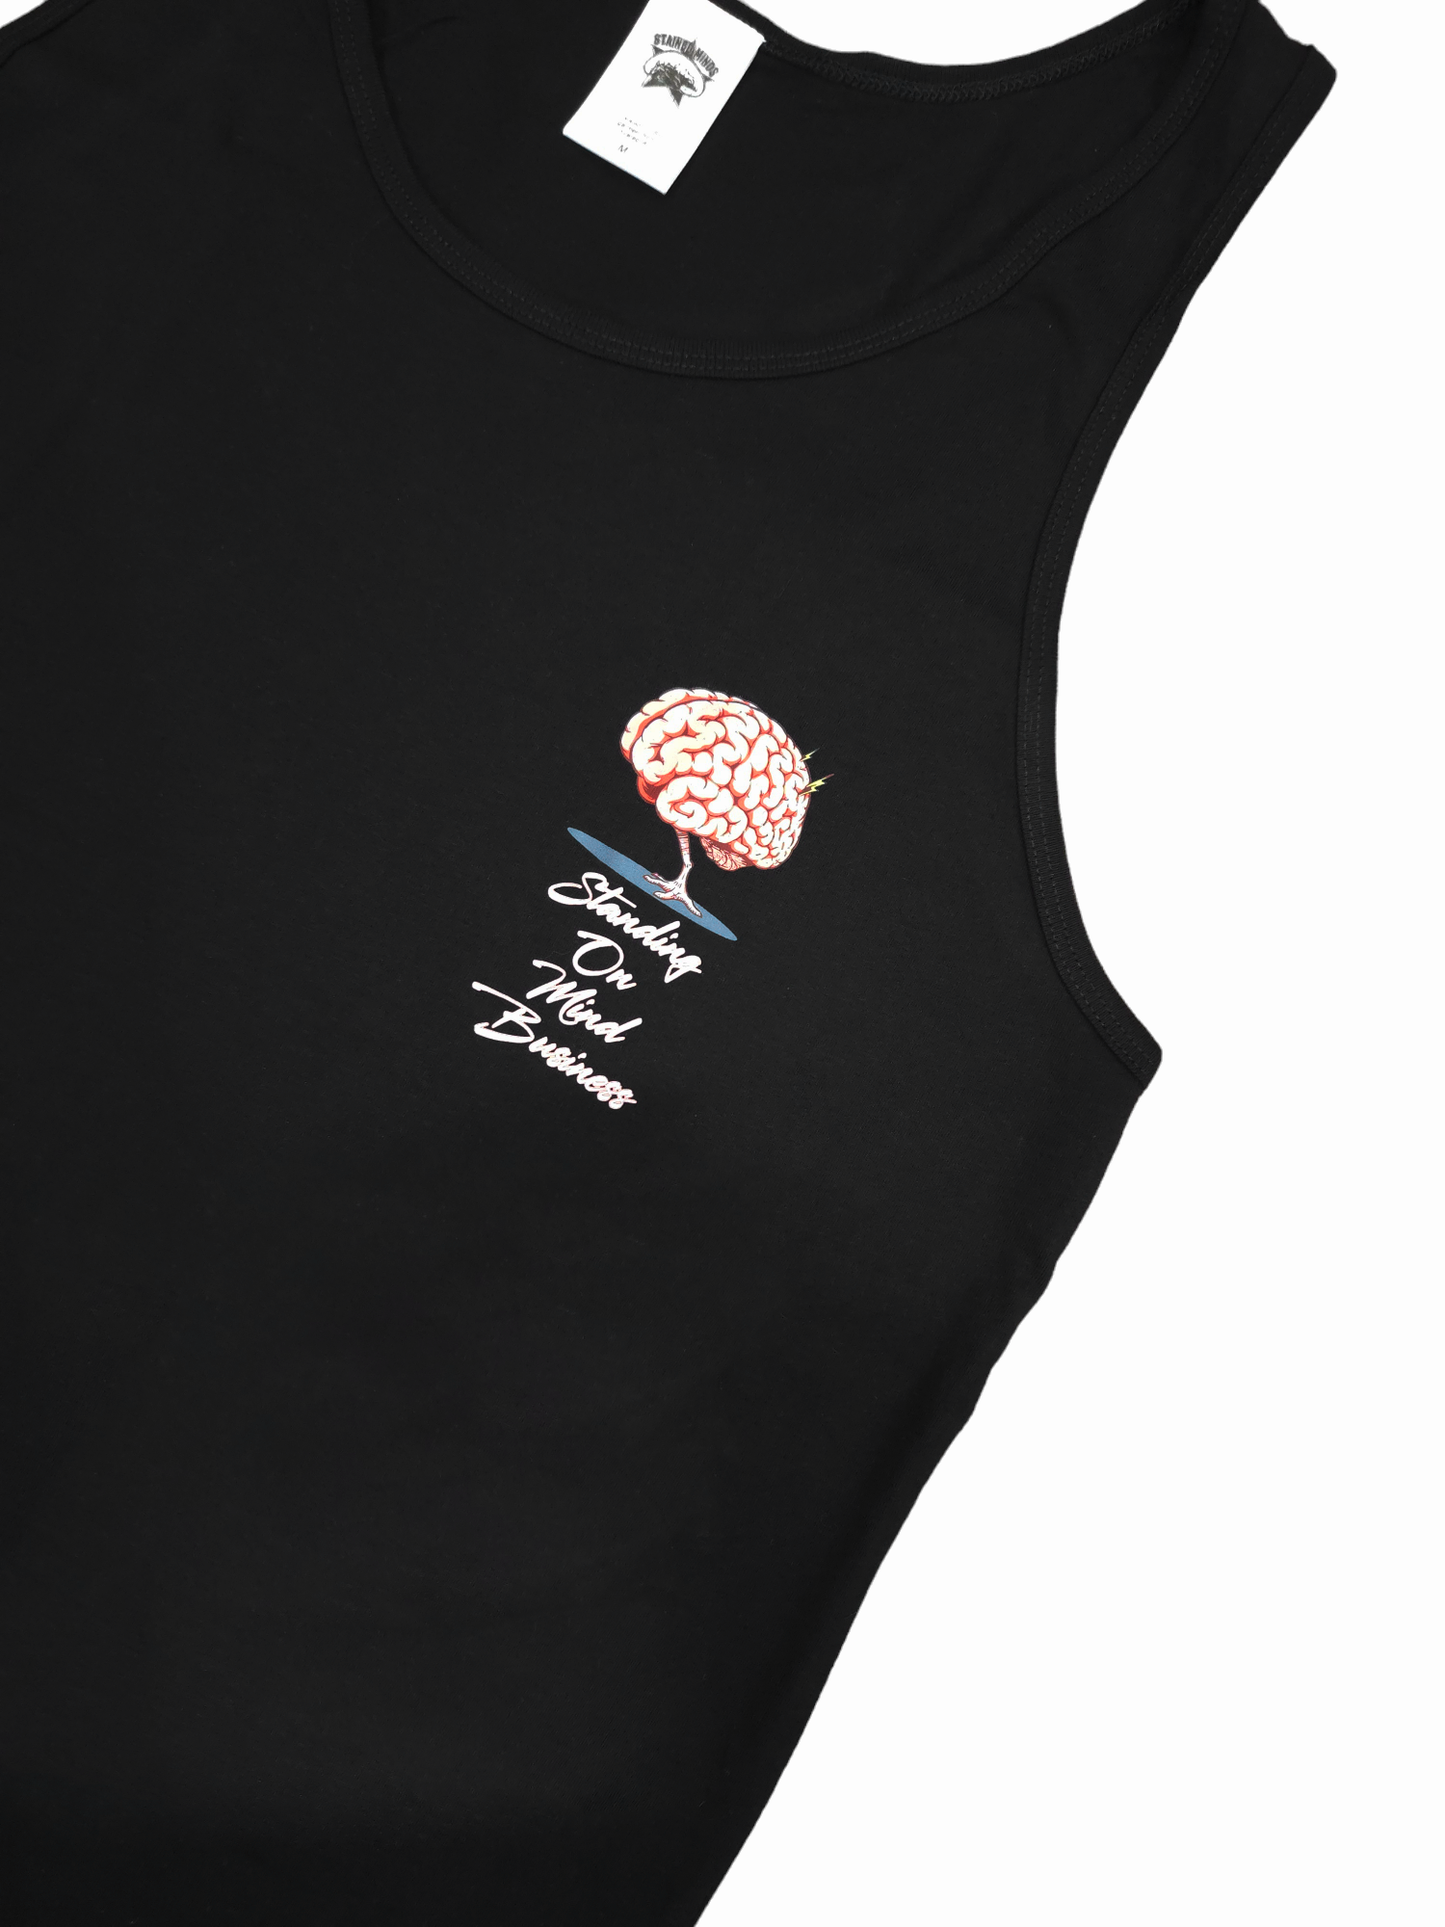 Stained Ladies - S.O.M.B Tank Top